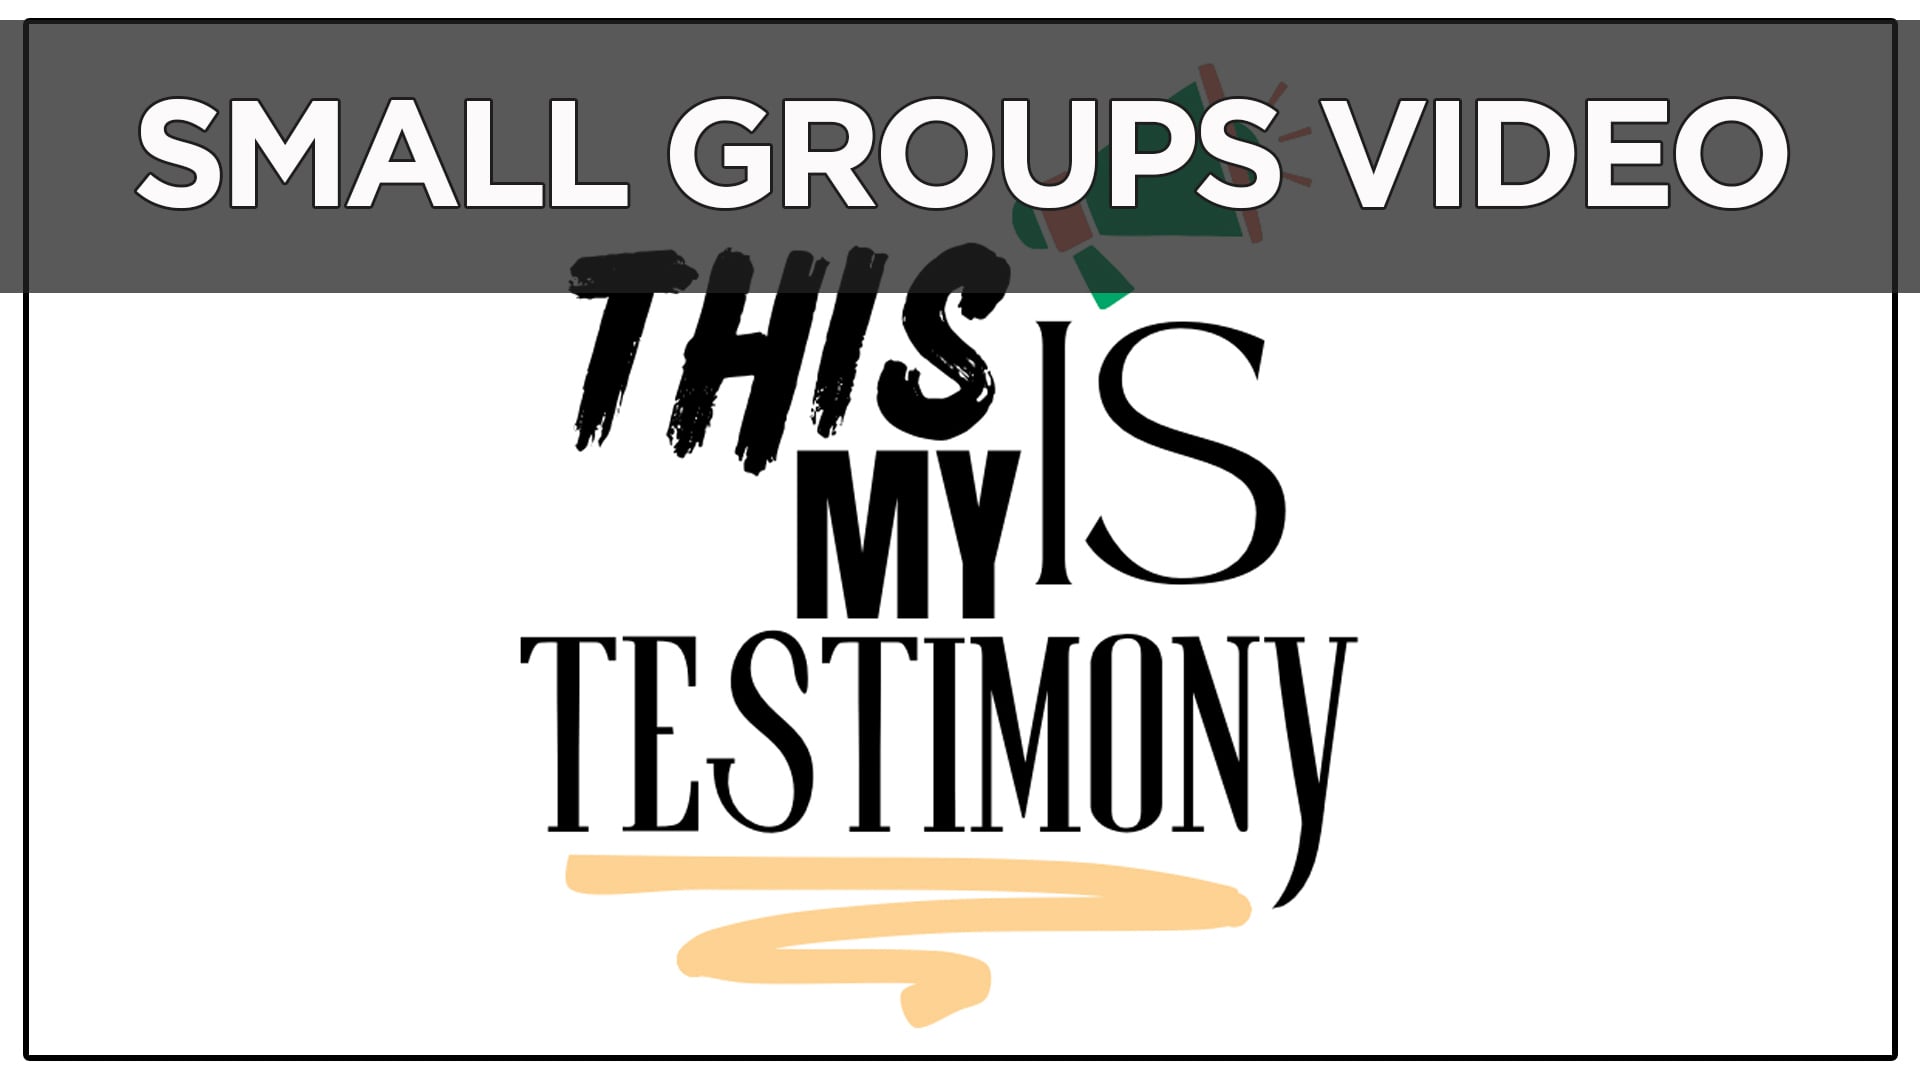 Small Groups Video: 6 Weeks of Testimony - Session 6